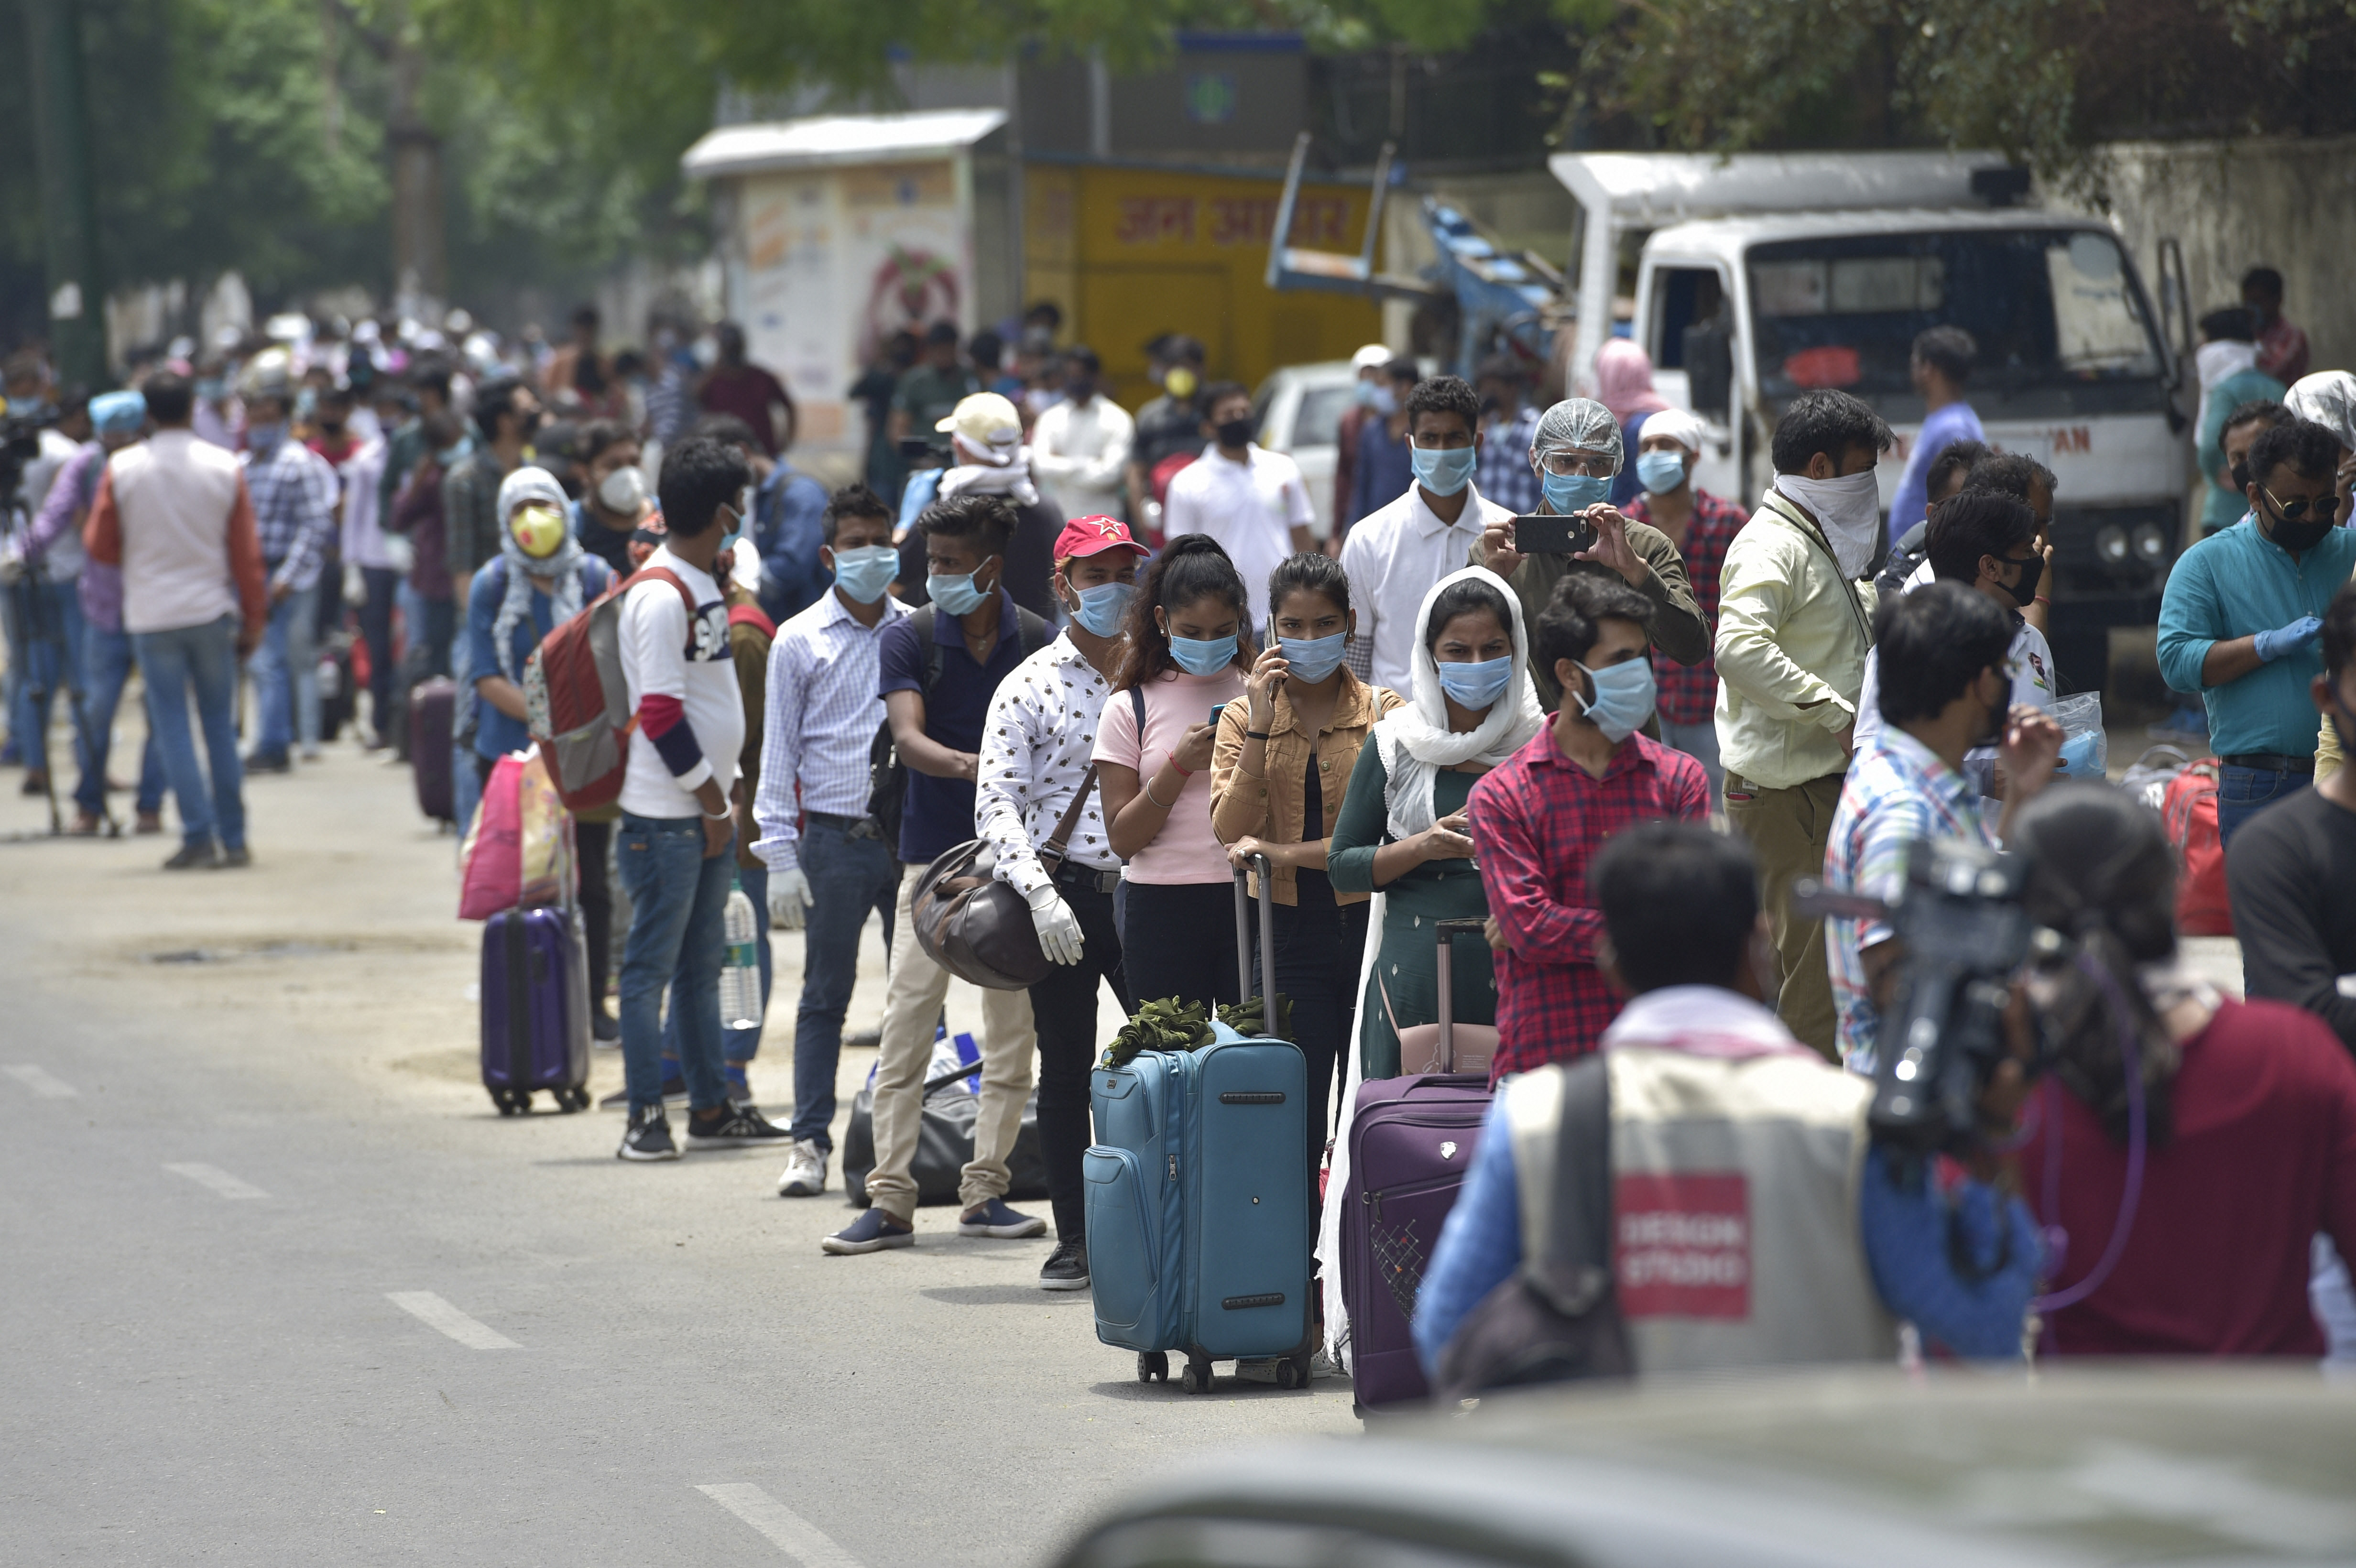 People wait to enter New Delhi Railway Station following resumption of passenger train services connecting major cities, during the ongoing Covid-19 nationwide lockdown, in New Delhi, Tuesday, May 12, 2020